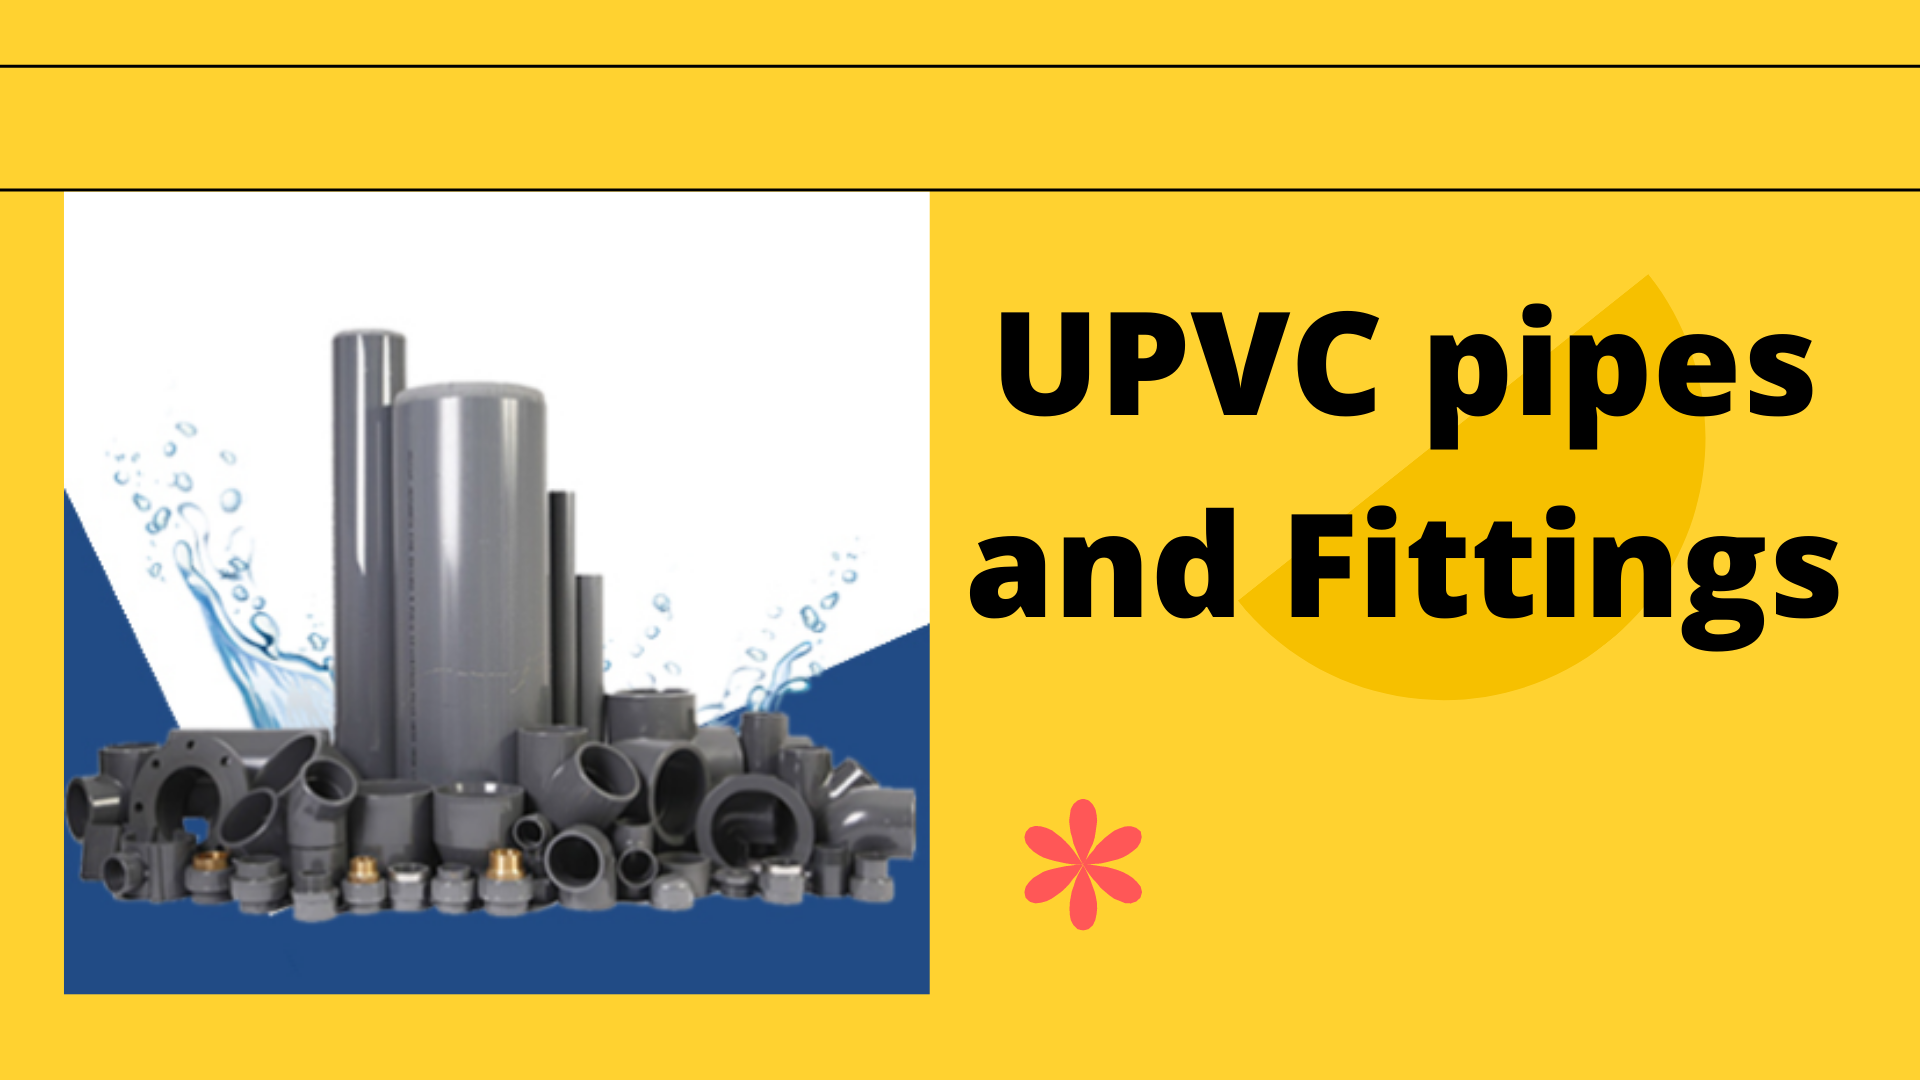 UPVC Pipes and fittings are an excellent choice for both hot and cold water supply.